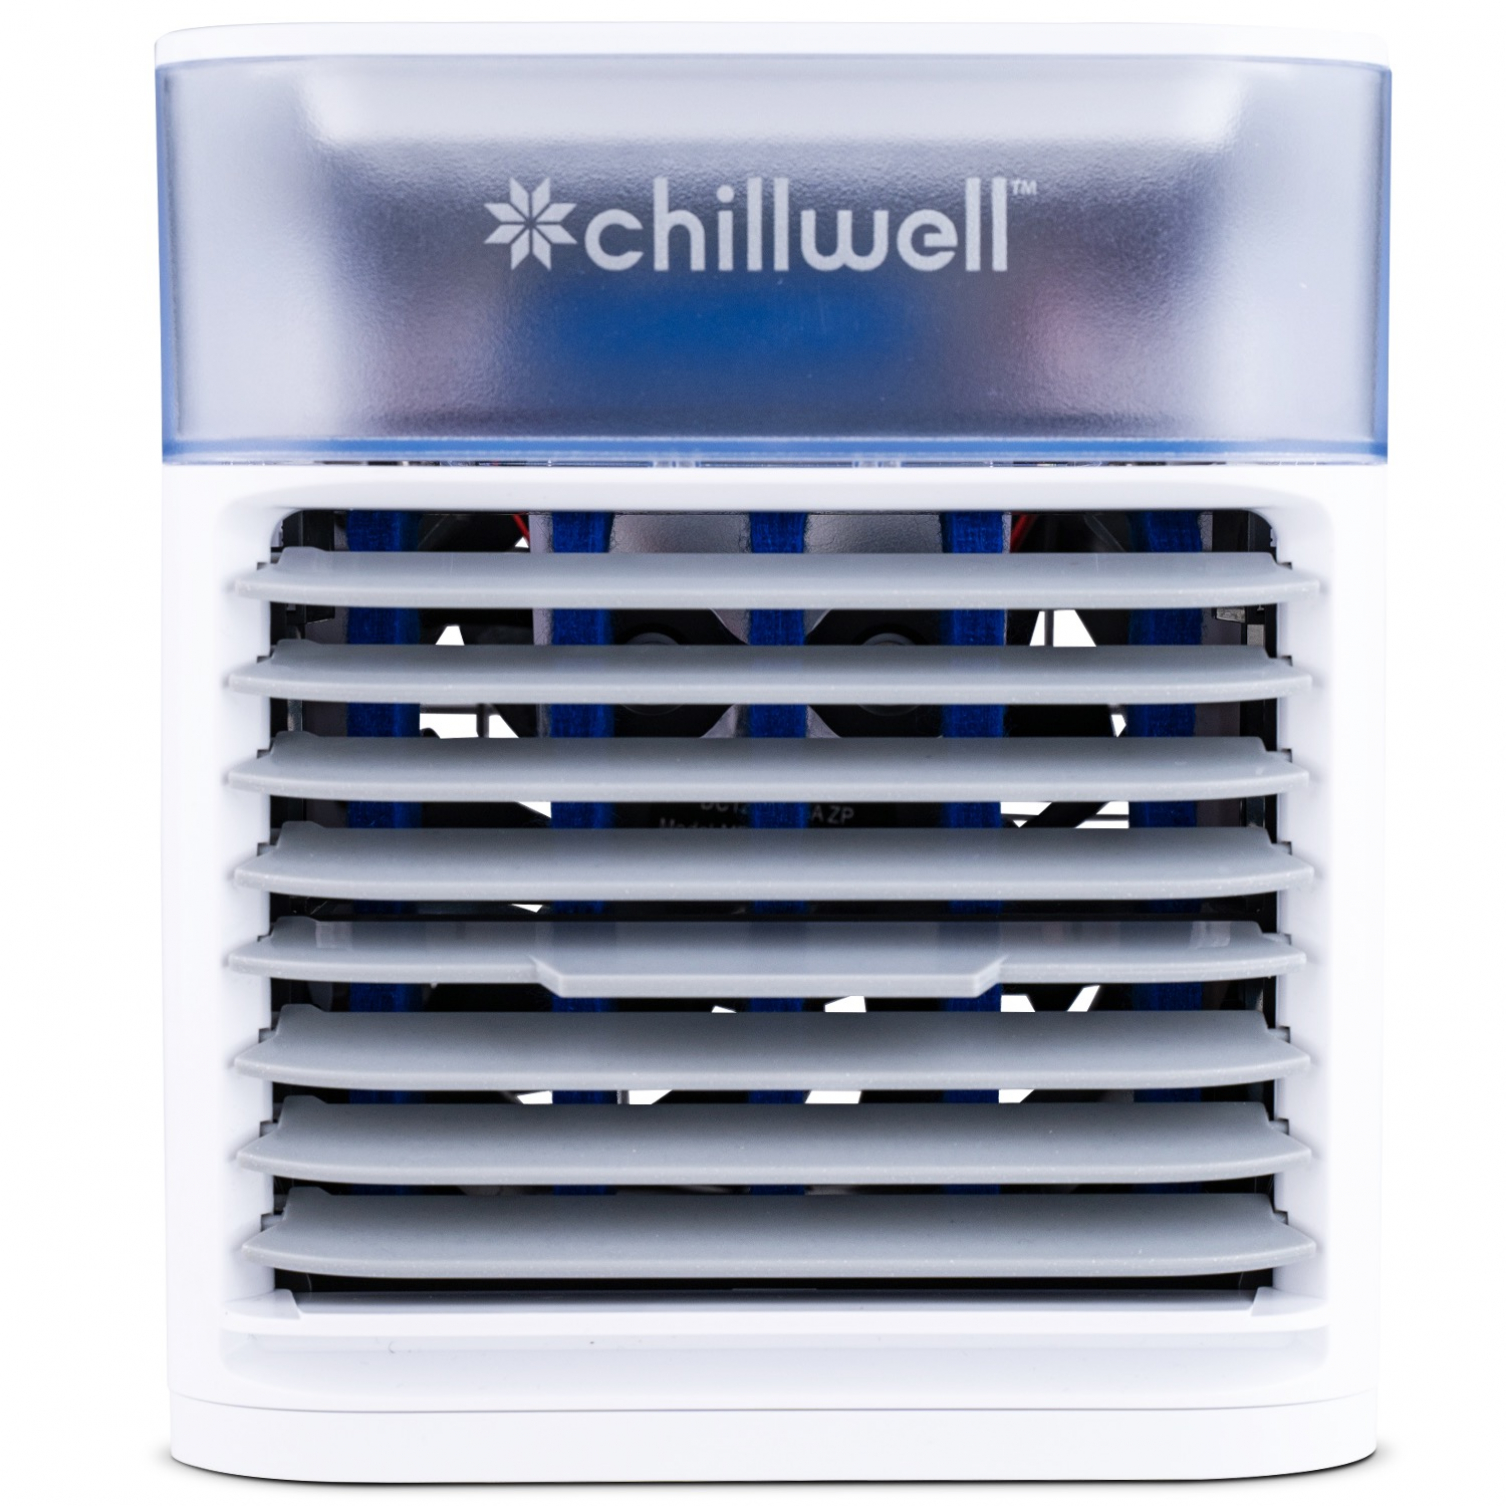 Chillwell AC Independant Reviews